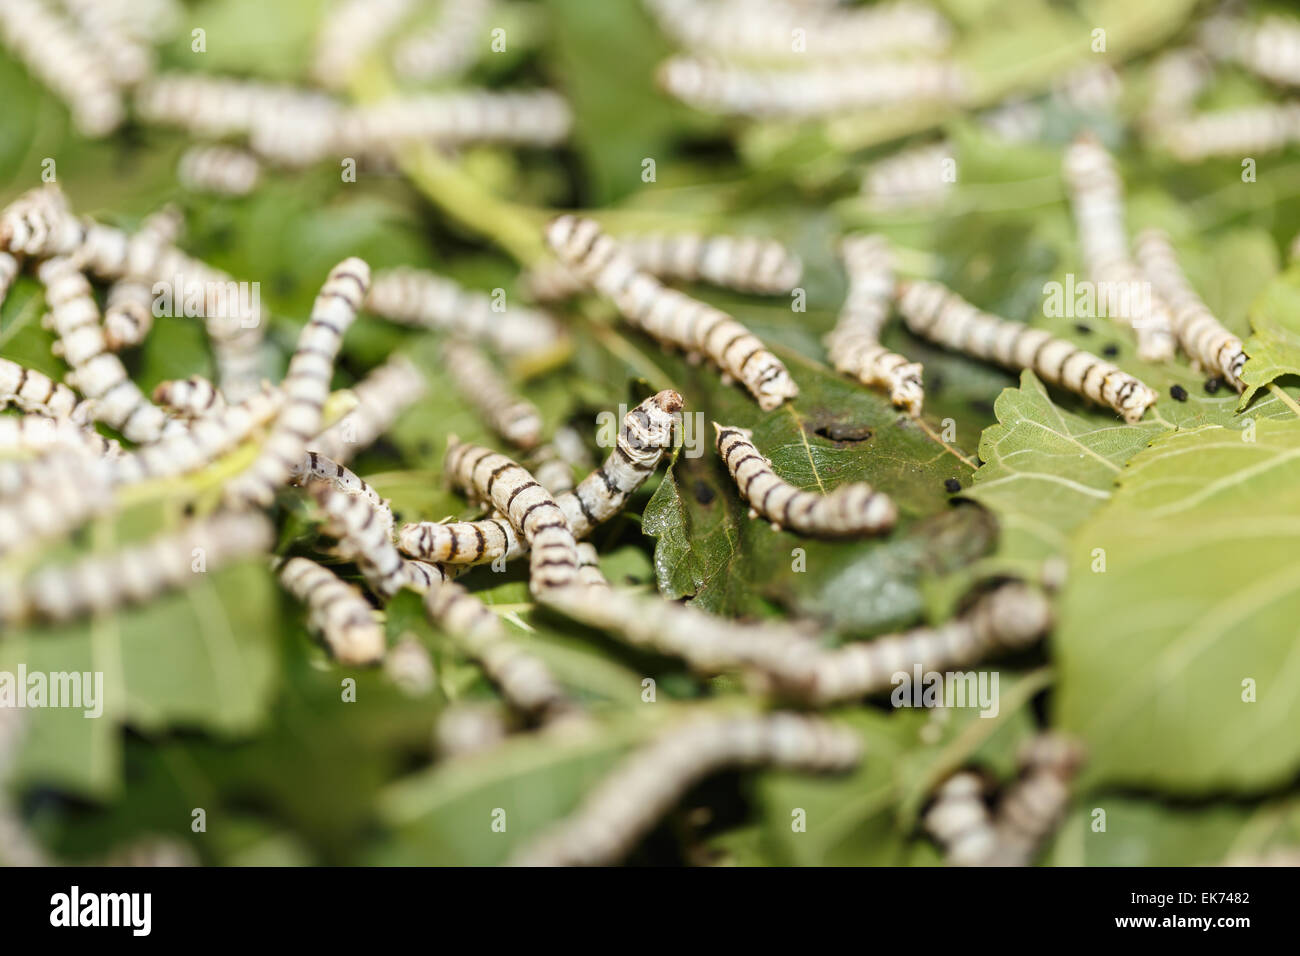 Silk worm eating mulberry green leaf Stock Photo